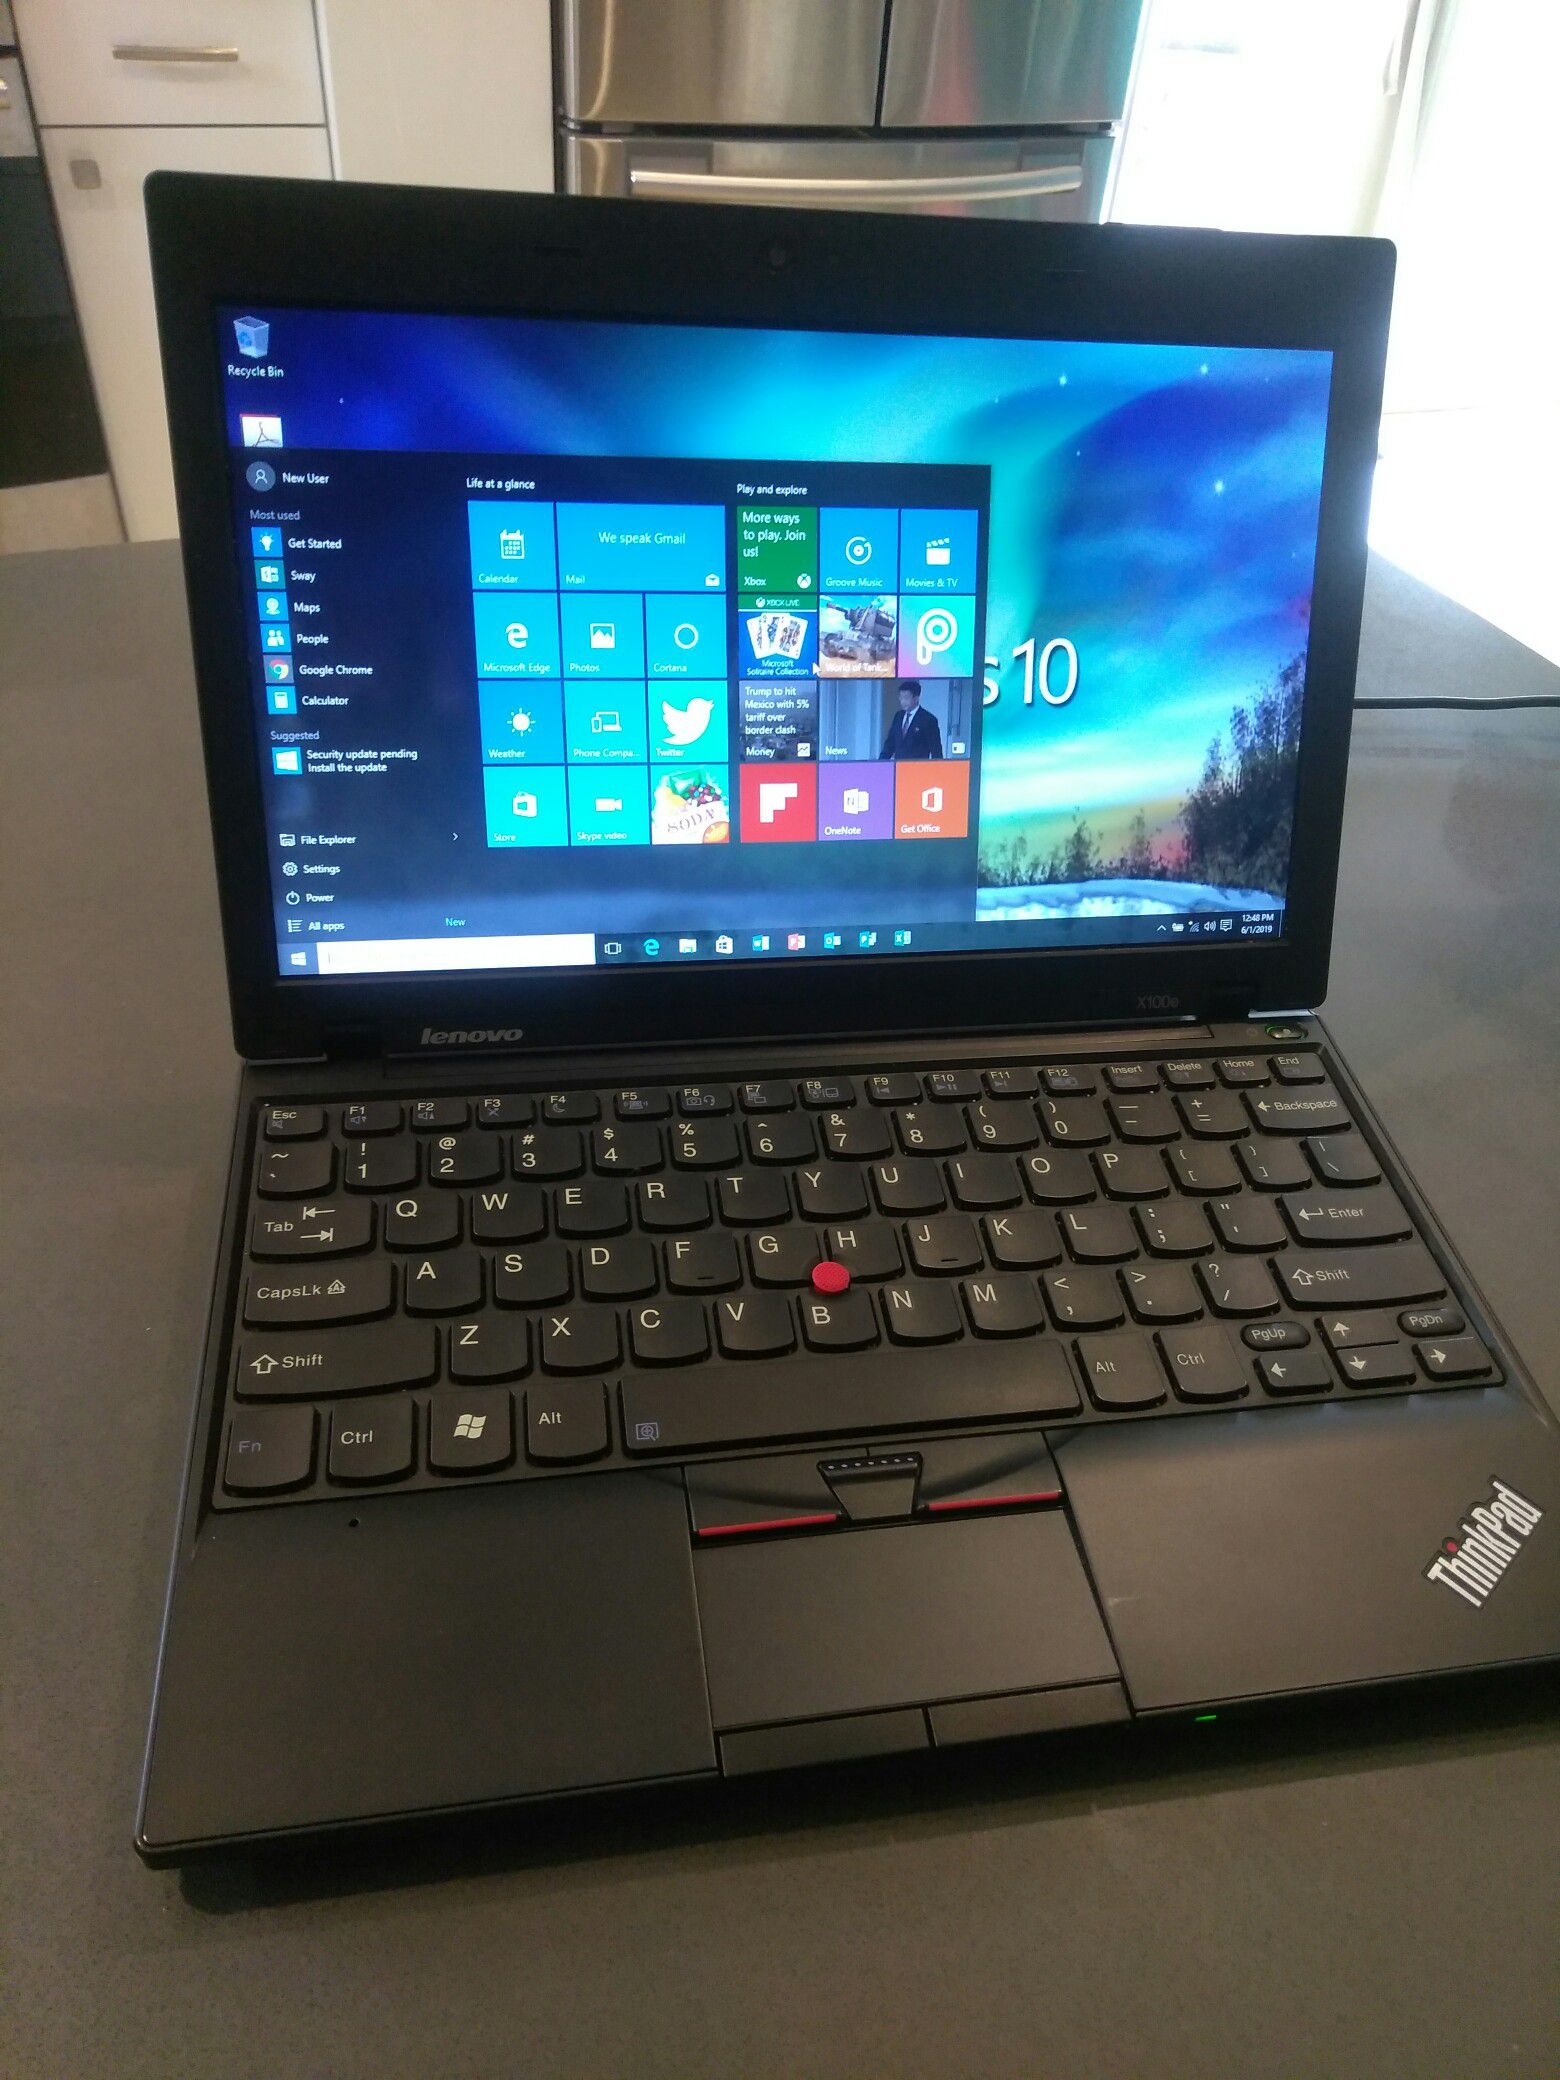 Super Slim Lenovo Laptop 12" , New battery, new SSD drive, Windows 10 Pro, Car & wall charger included